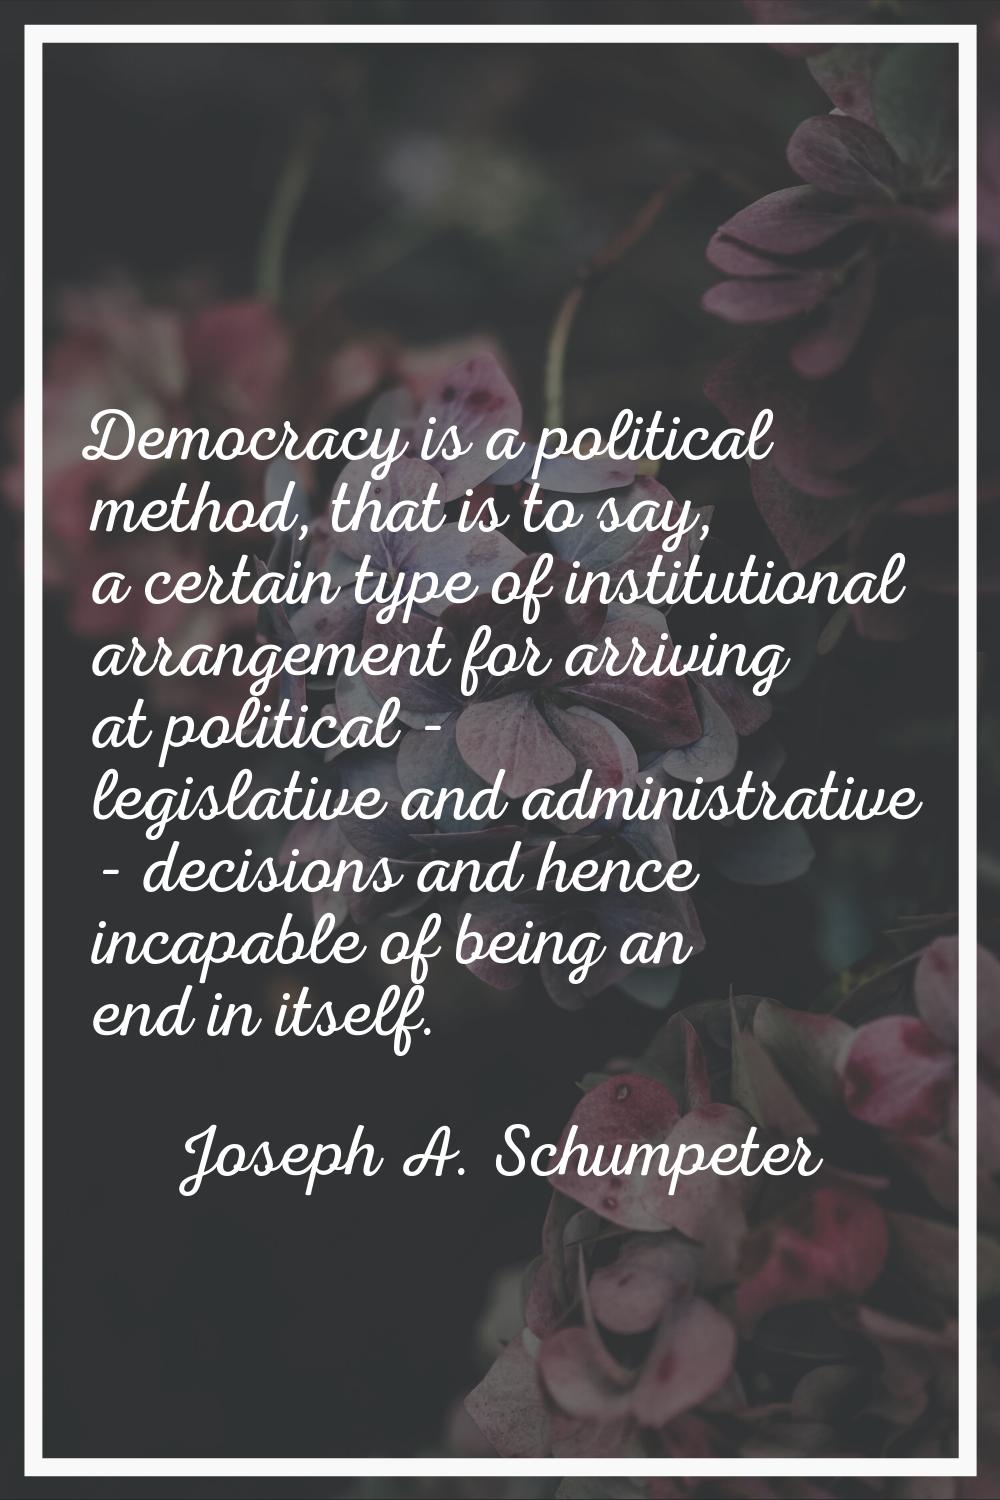 Democracy is a political method, that is to say, a certain type of institutional arrangement for ar